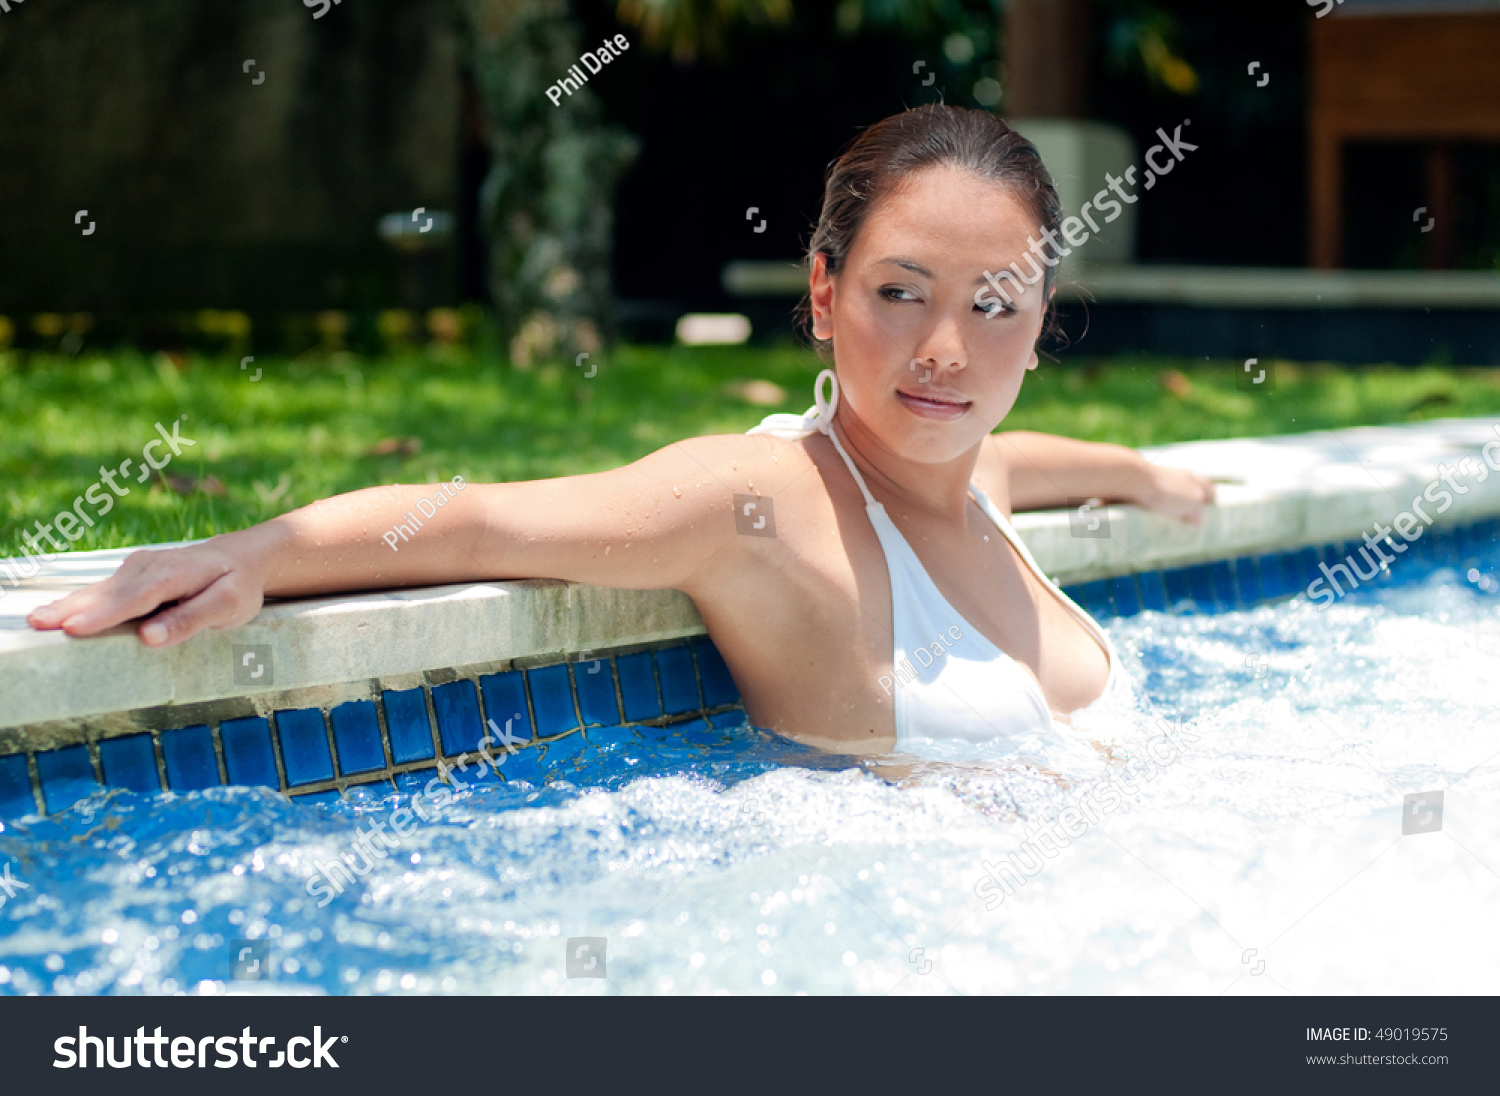 An attractive woman relaxing in the pool #49019575